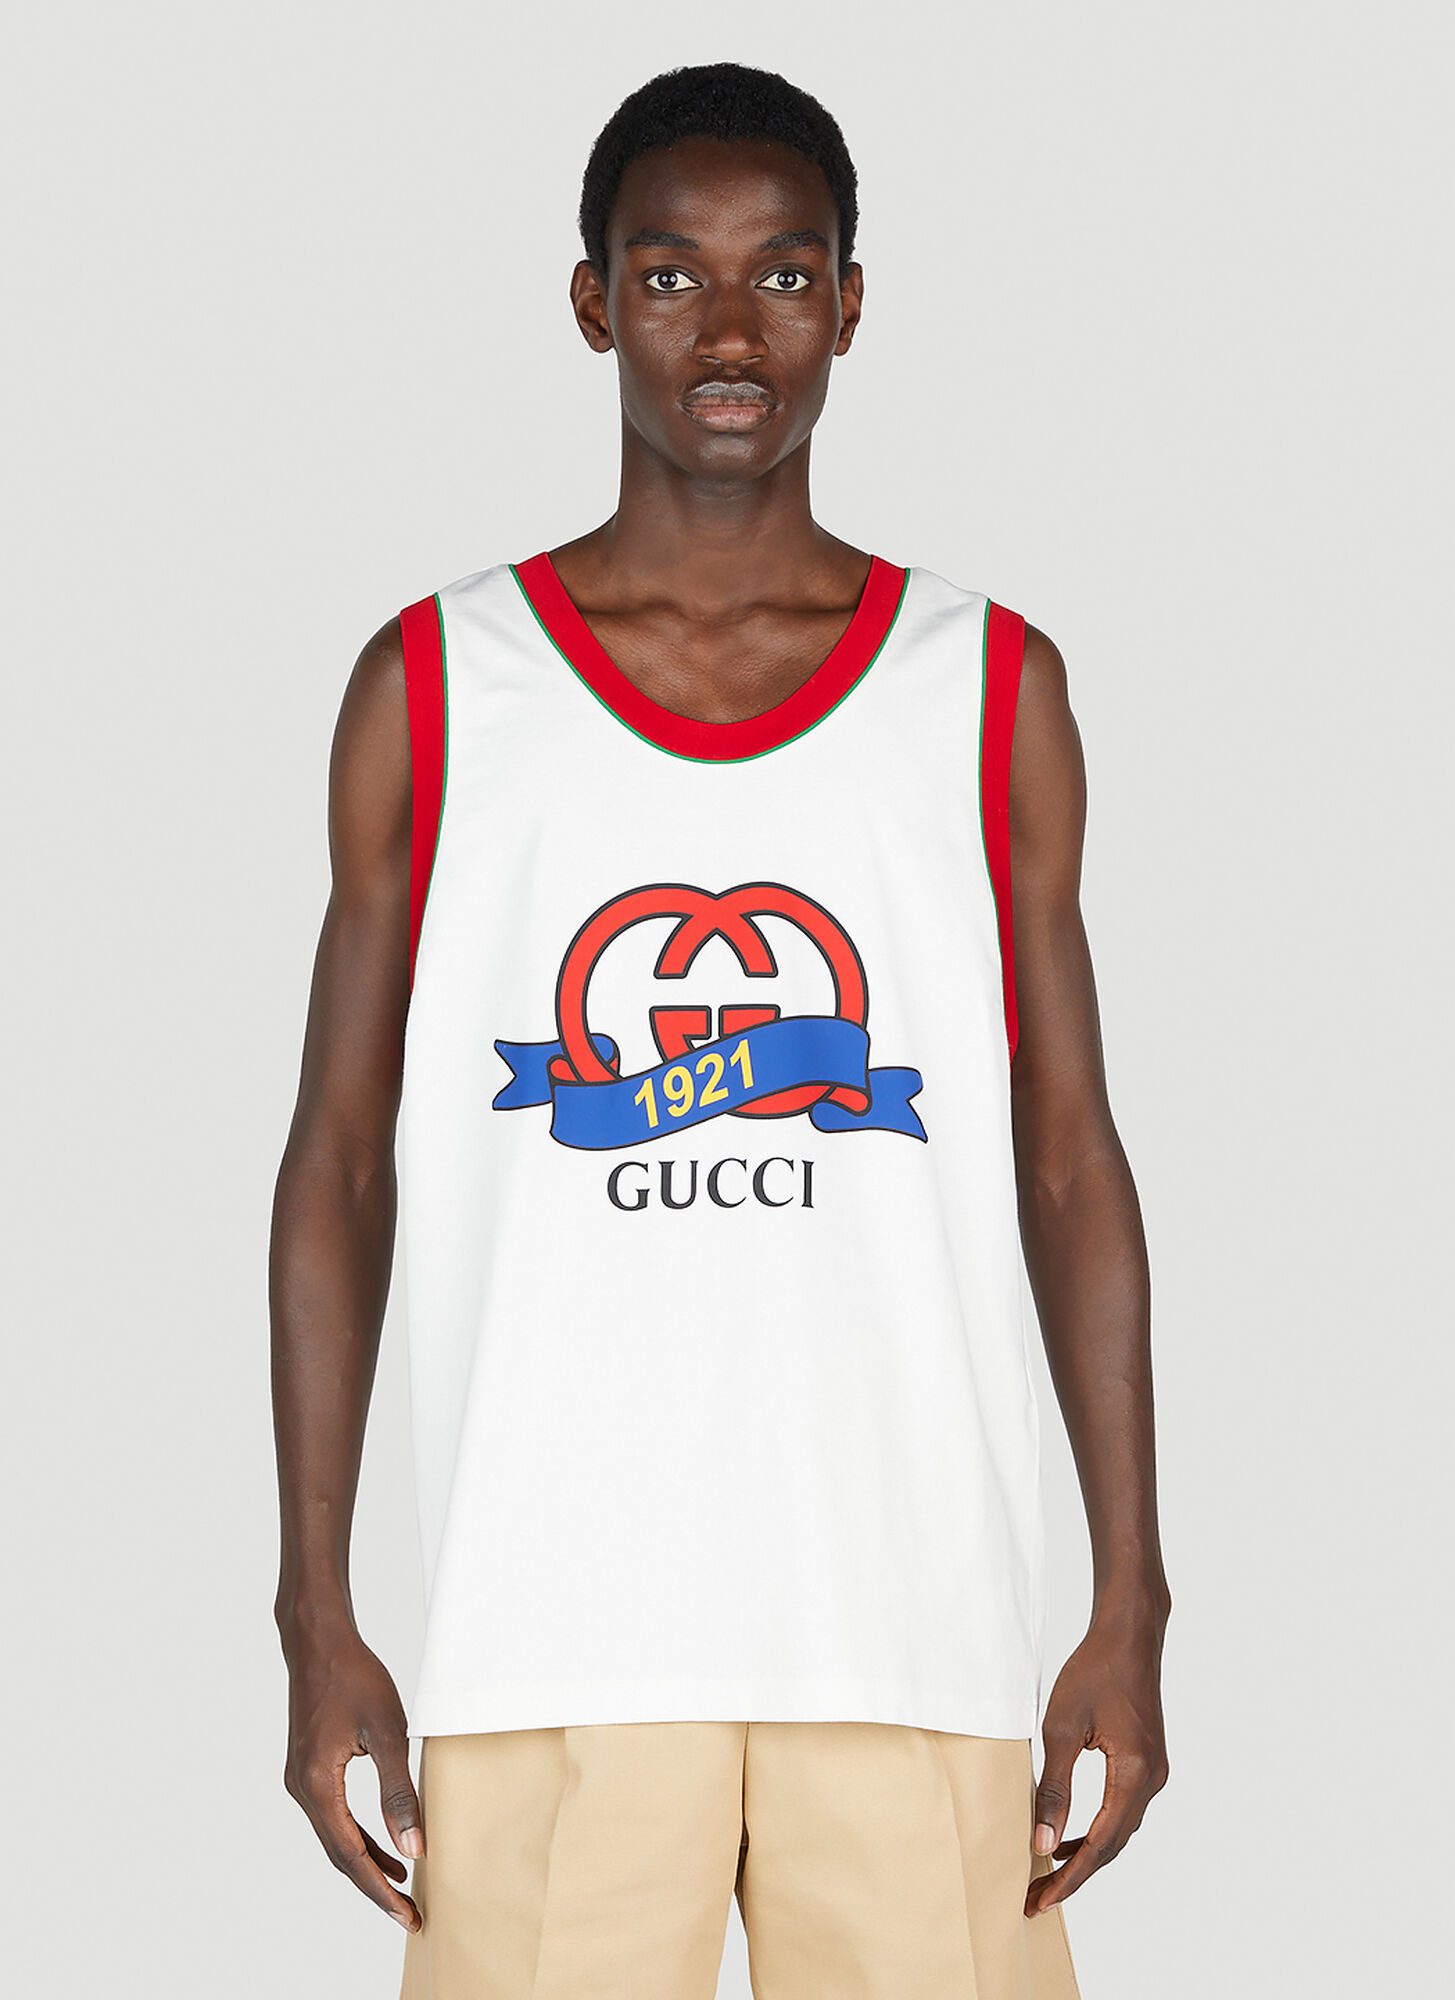 Gucci Baketball Tank Top Male Whitemale